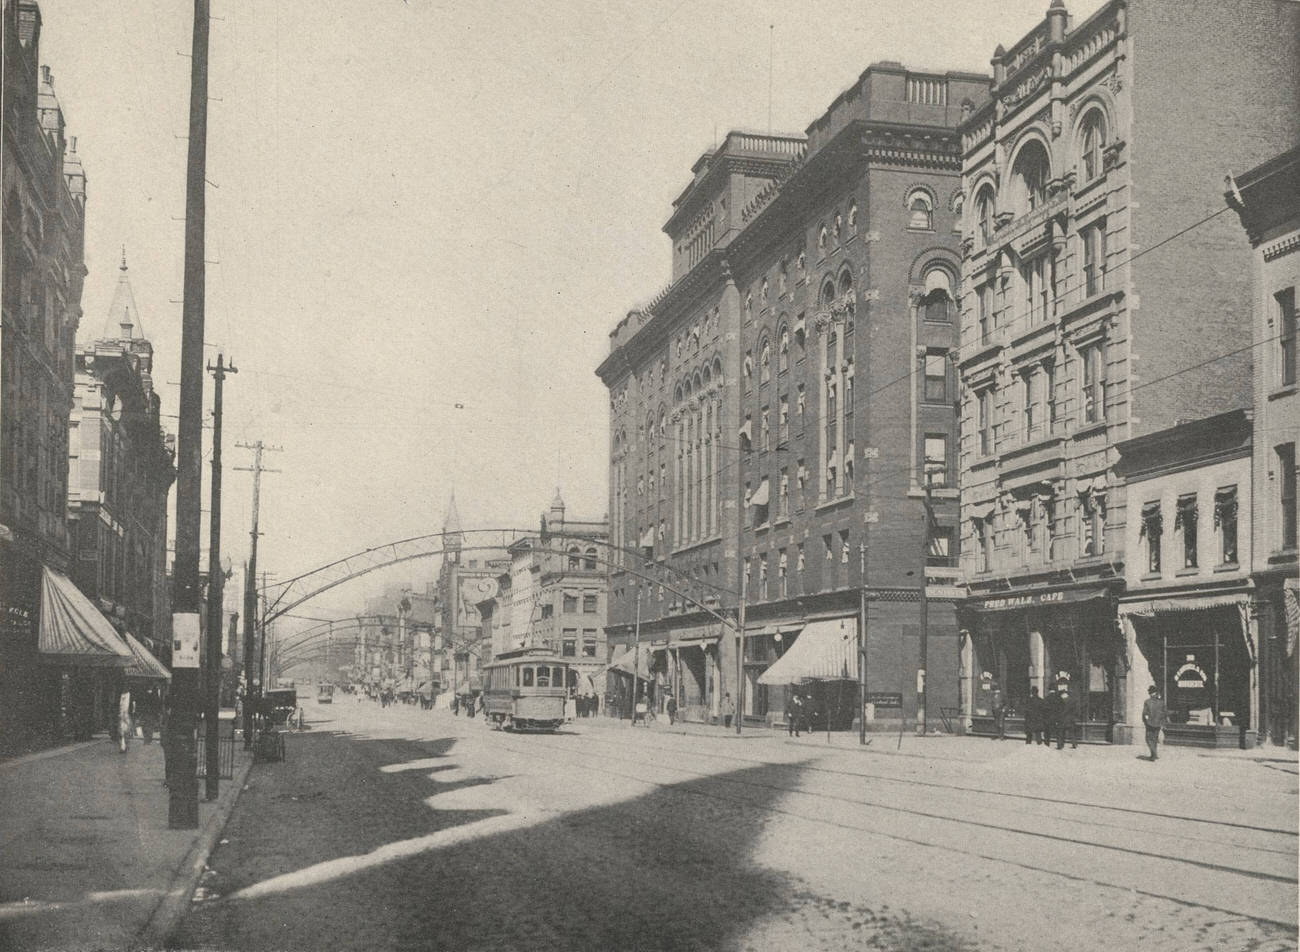 South High Street looking north with the Great Southern Hotel, 1903.